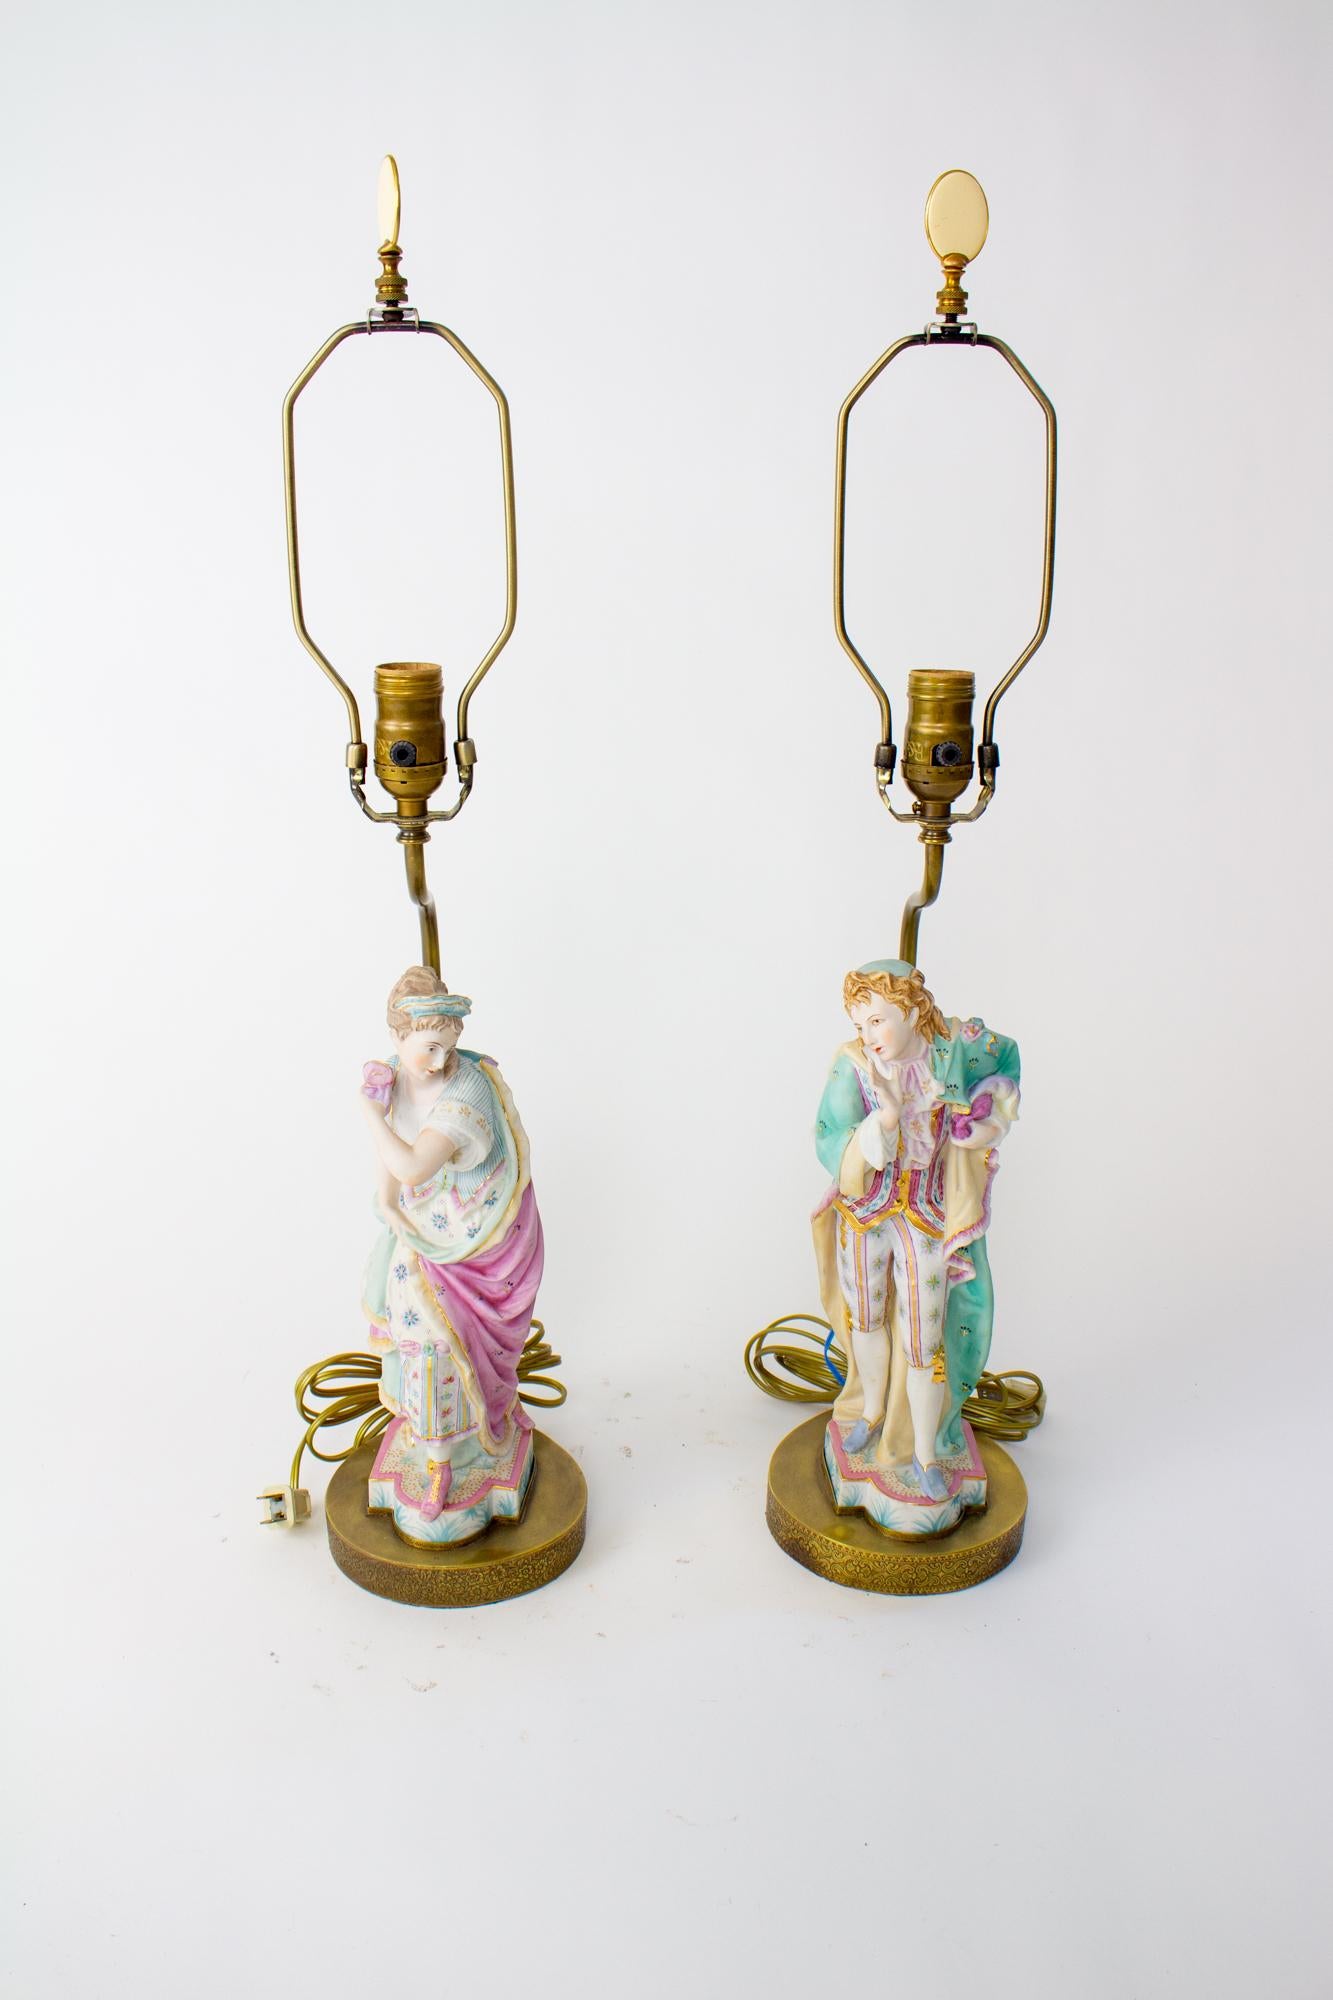 Japanese Mid 20th Century Masquerade Bisque Figurine Lamps - a Pair For Sale